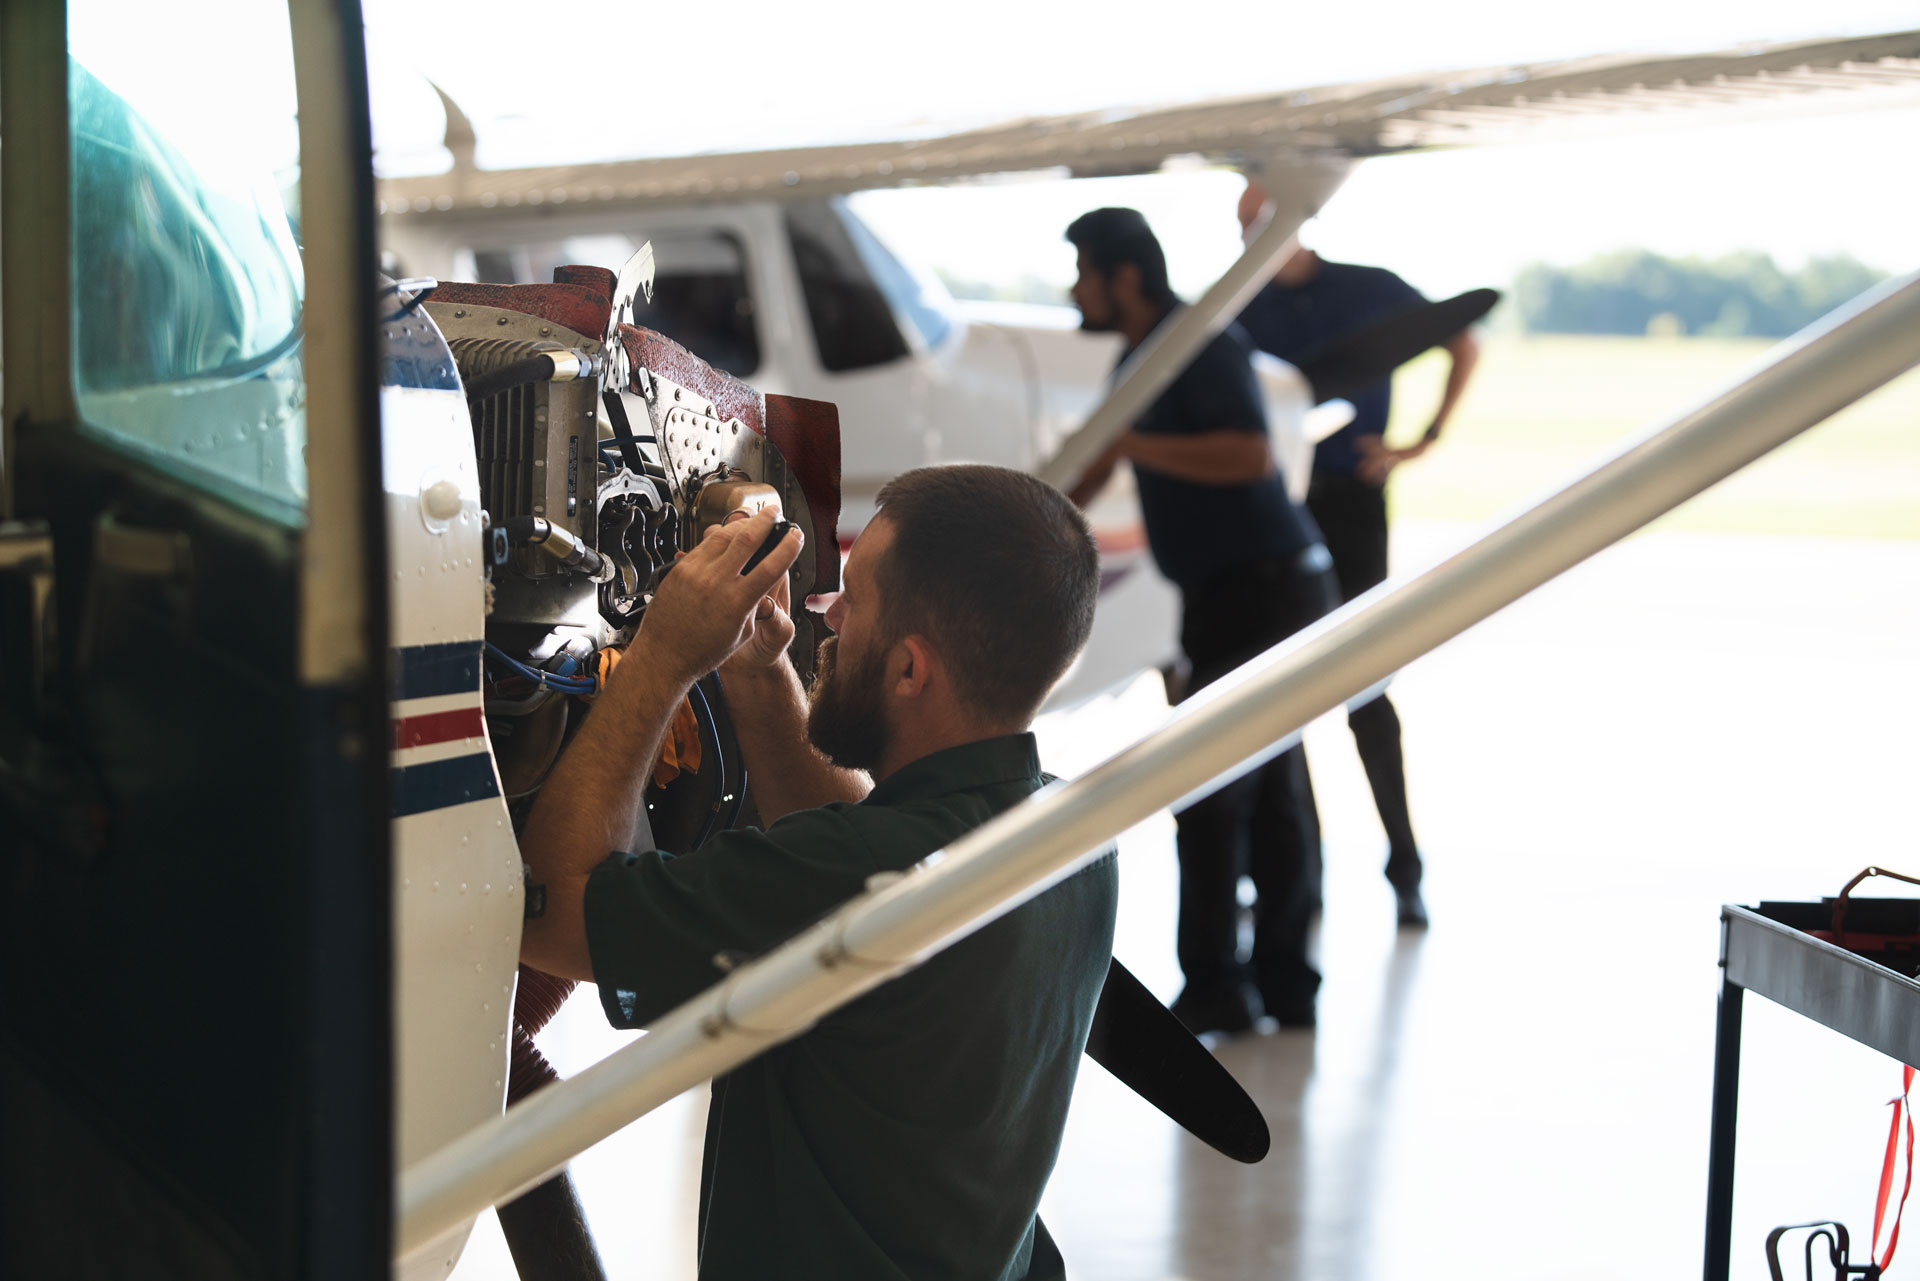 Image of student working on a plane in a hangar. It is used on the flight training program page.